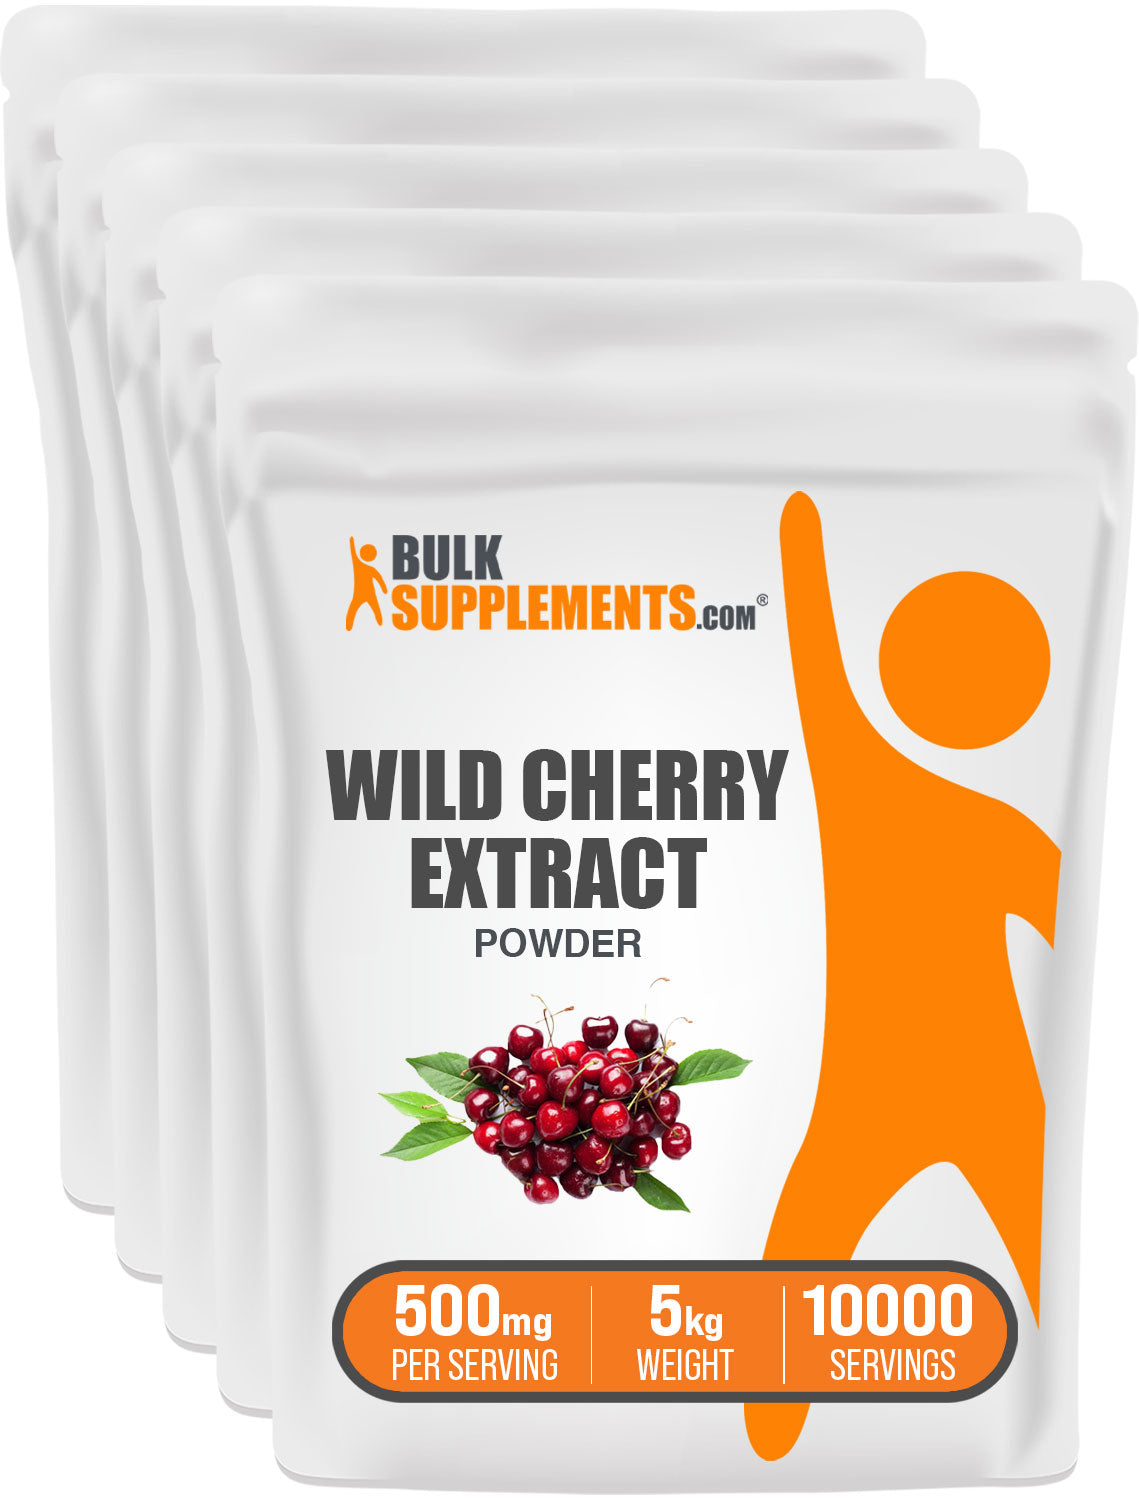 Wild Cherry Extract Powder 500mg 5kg Bags